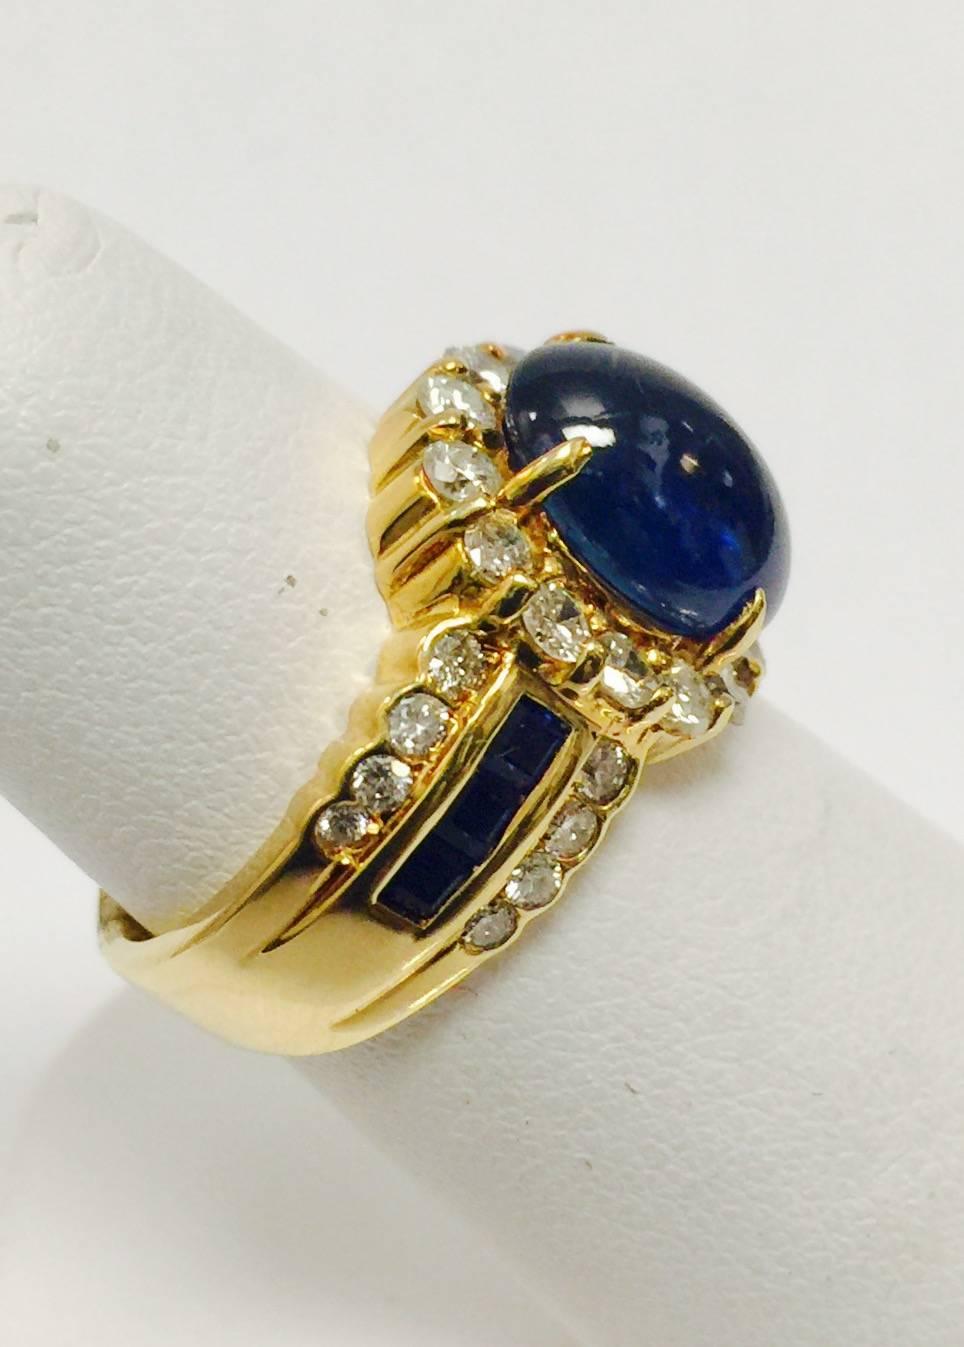 Beautifully crafted in 18 karat yellow gold, this ring is a pure classic!  Featuring a prong set, oval cabochon sapphire weighing 4.60 carats.  Surrounding the sapphire are matched round full cut diamonds that also embrace both sides of the shank